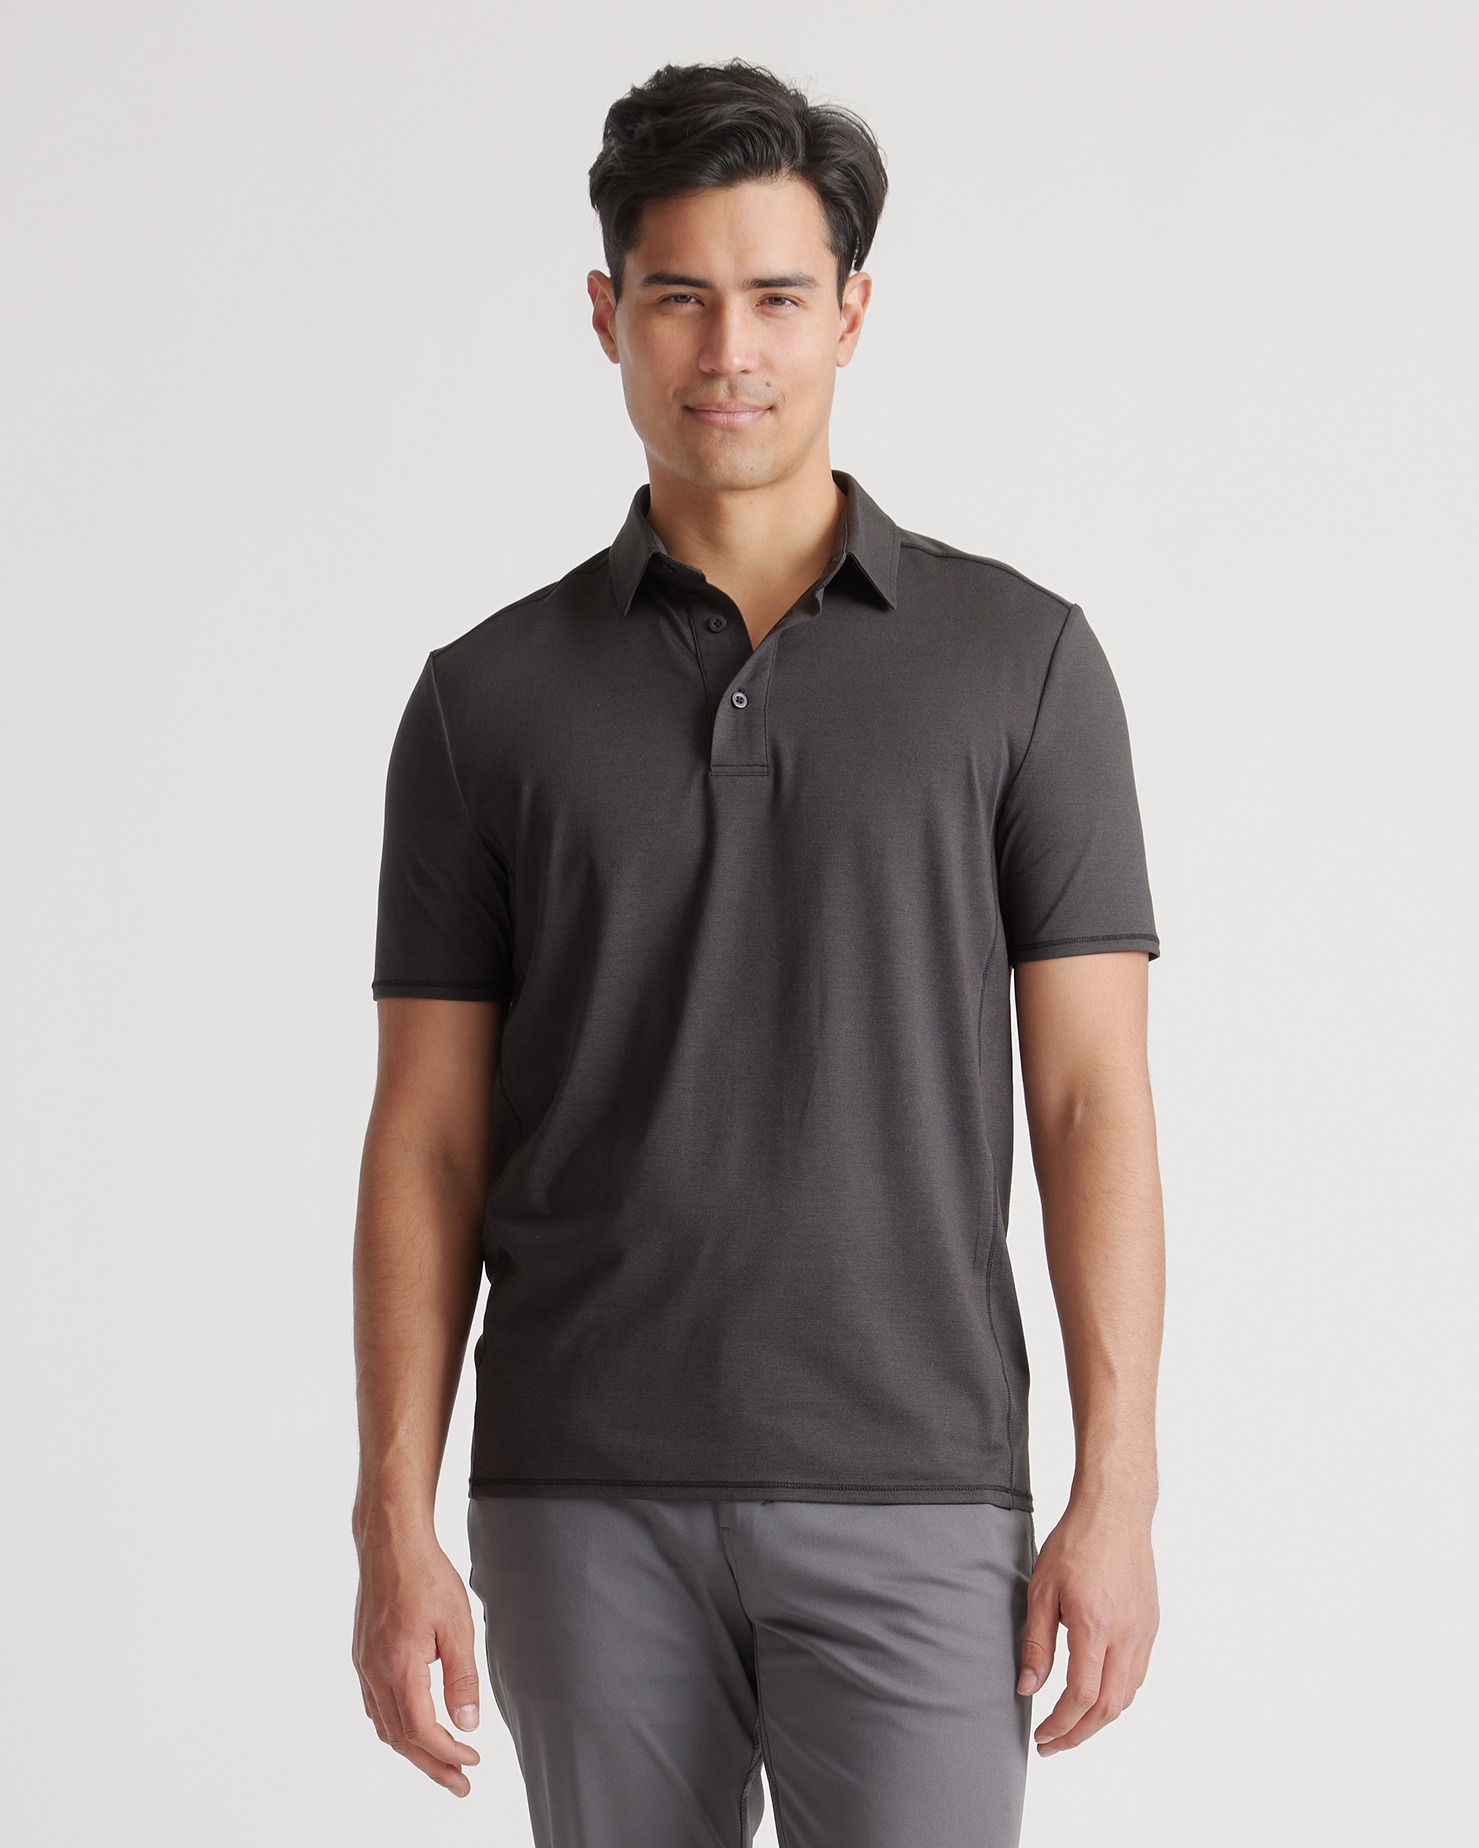 Flowknit Ultra-Soft Performance Polo